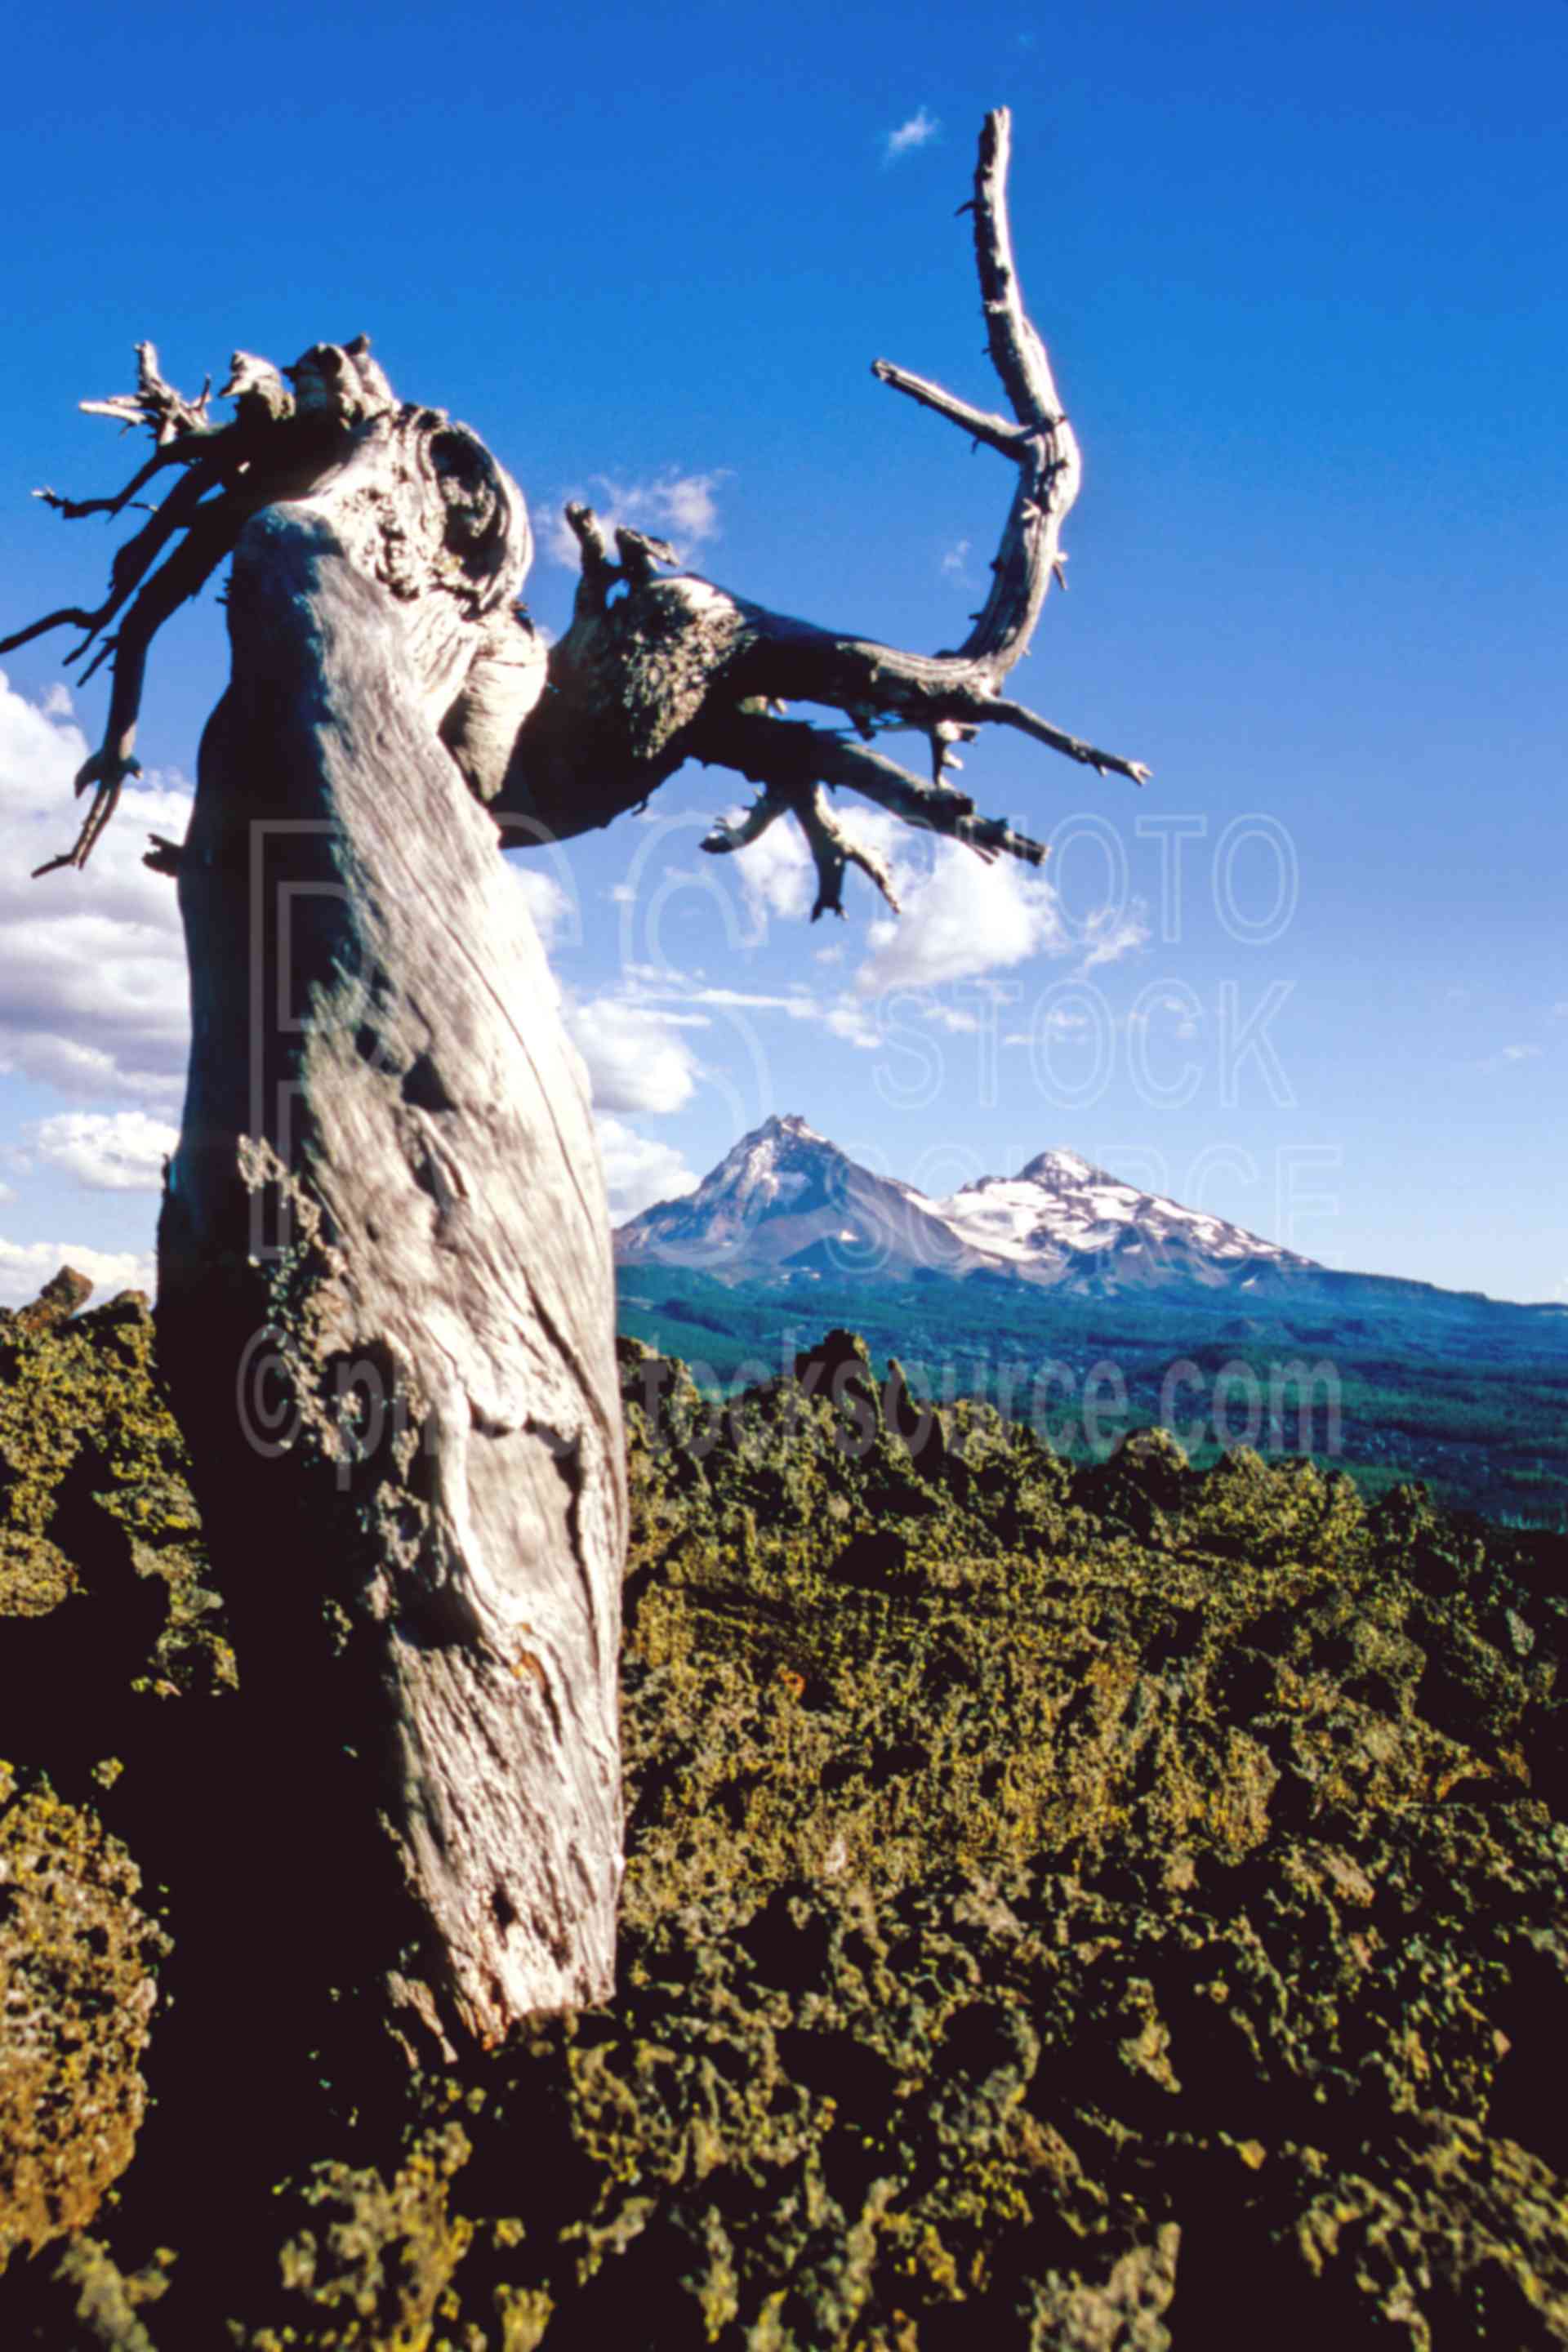 North and Middle Sister,lava bed,tree,dead tree,snag,north sister,middle sister,usas,mountains